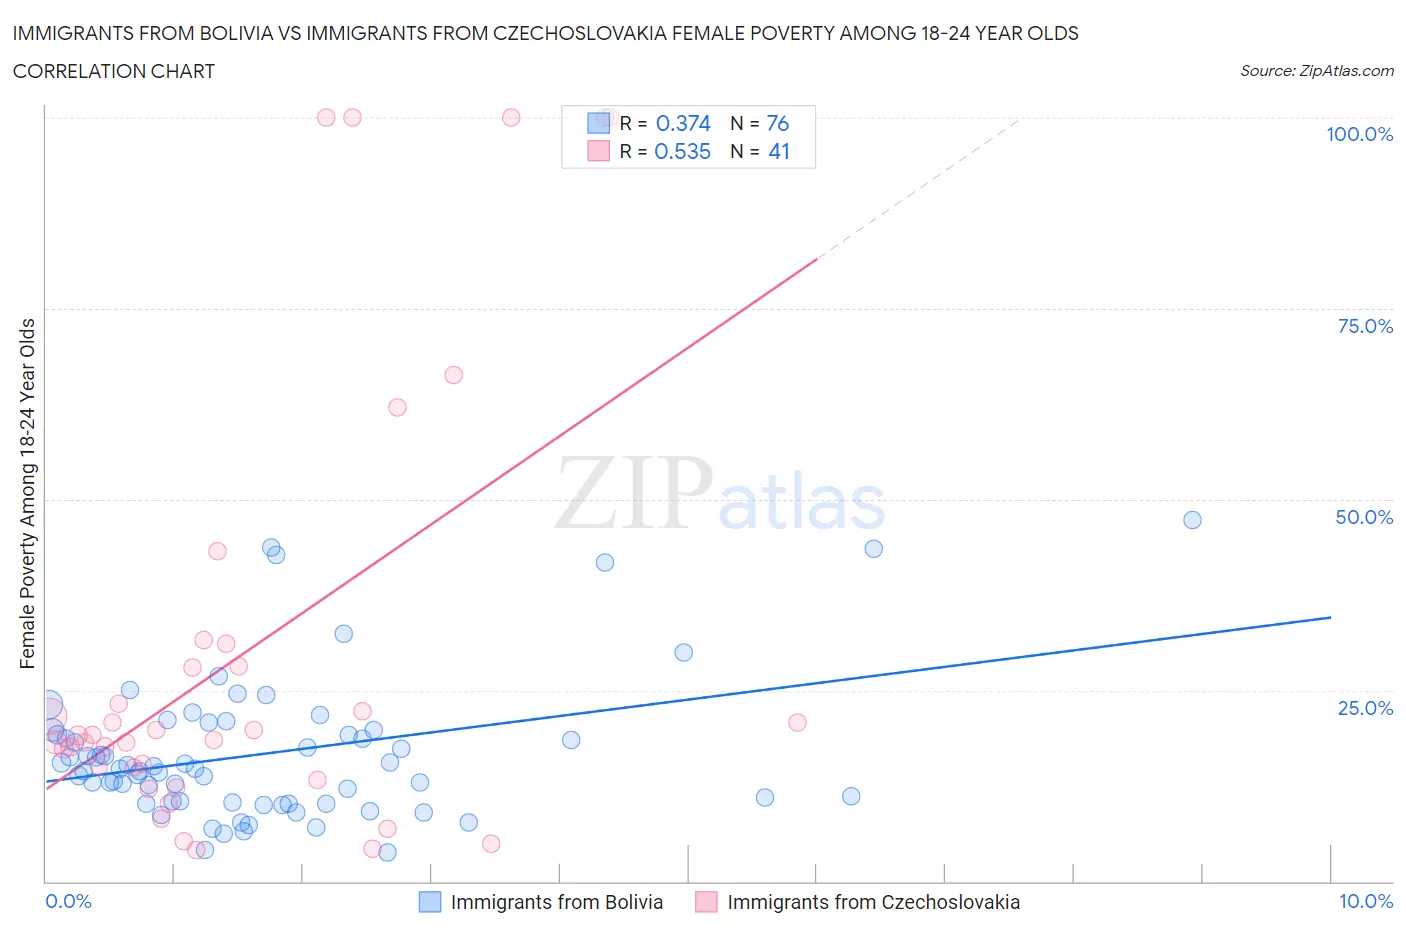 Immigrants from Bolivia vs Immigrants from Czechoslovakia Female Poverty Among 18-24 Year Olds